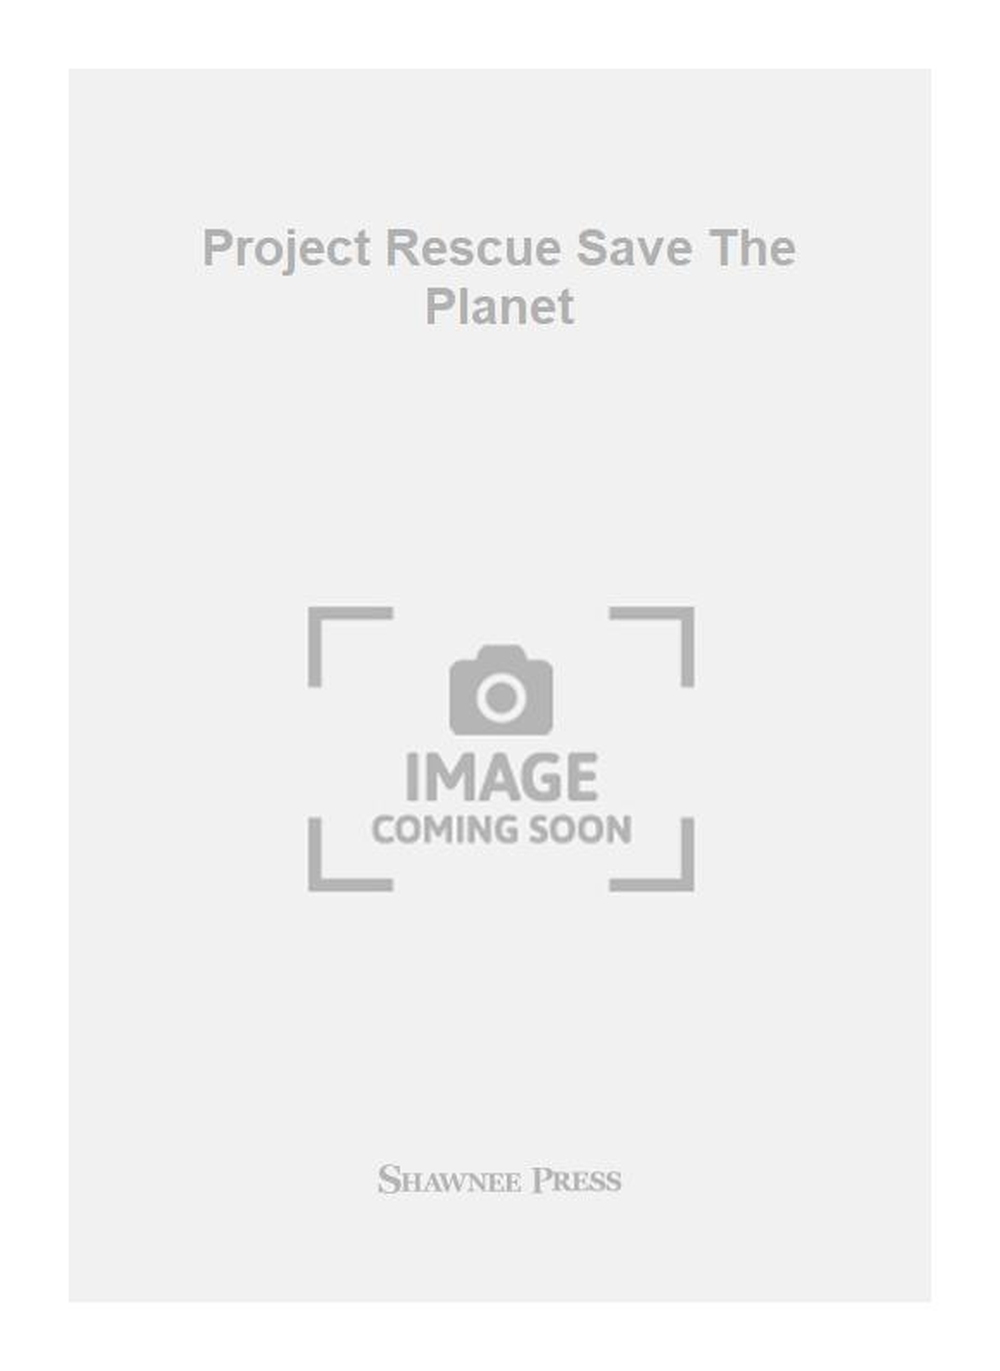 Project Rescue Save The Planet